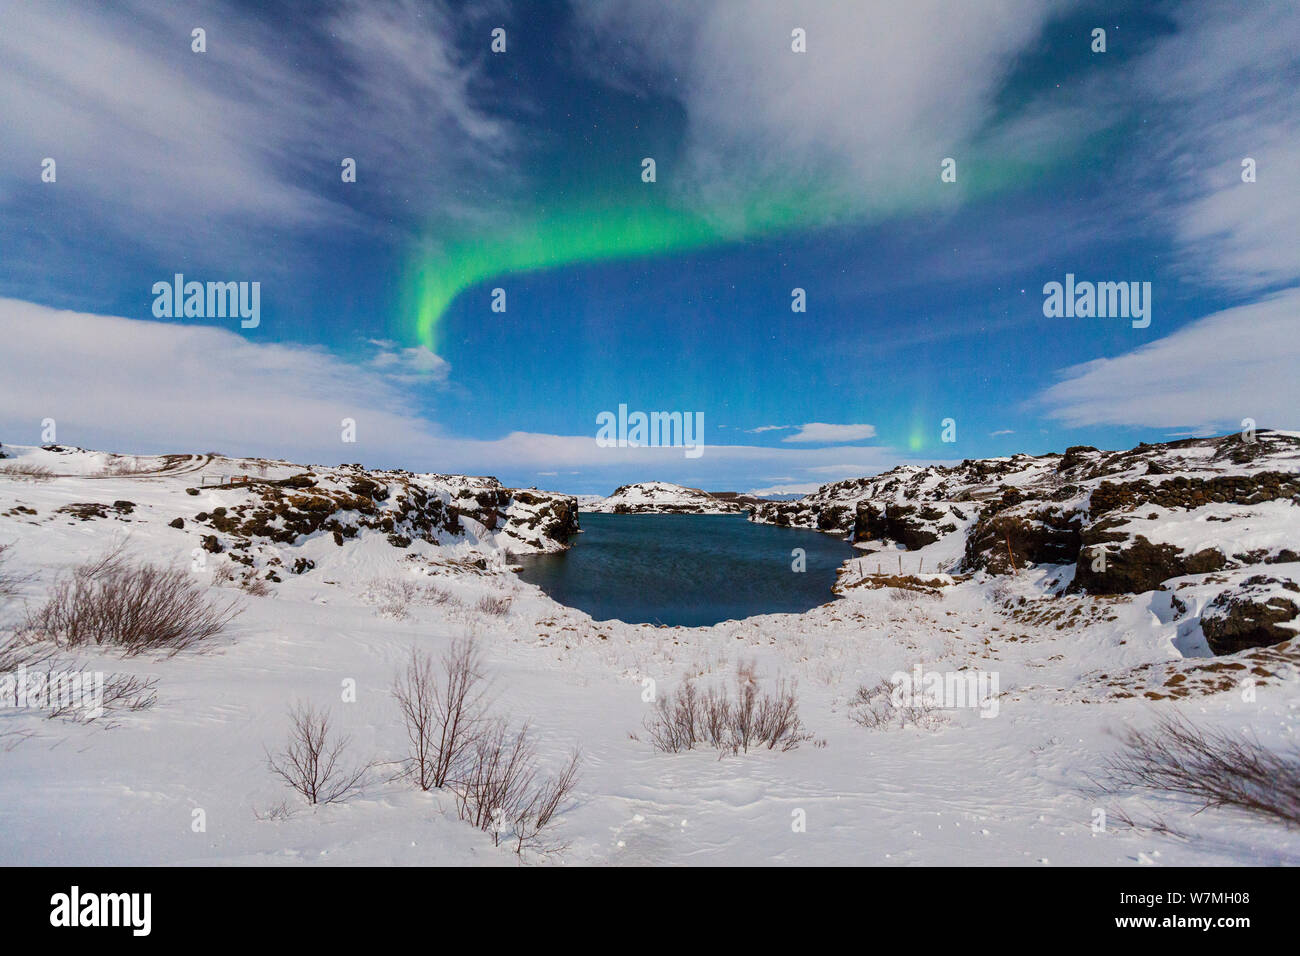 Northern lights / Aurora borealis over snowy landscape, Iceland, Europe, March 2012 Stock Photo